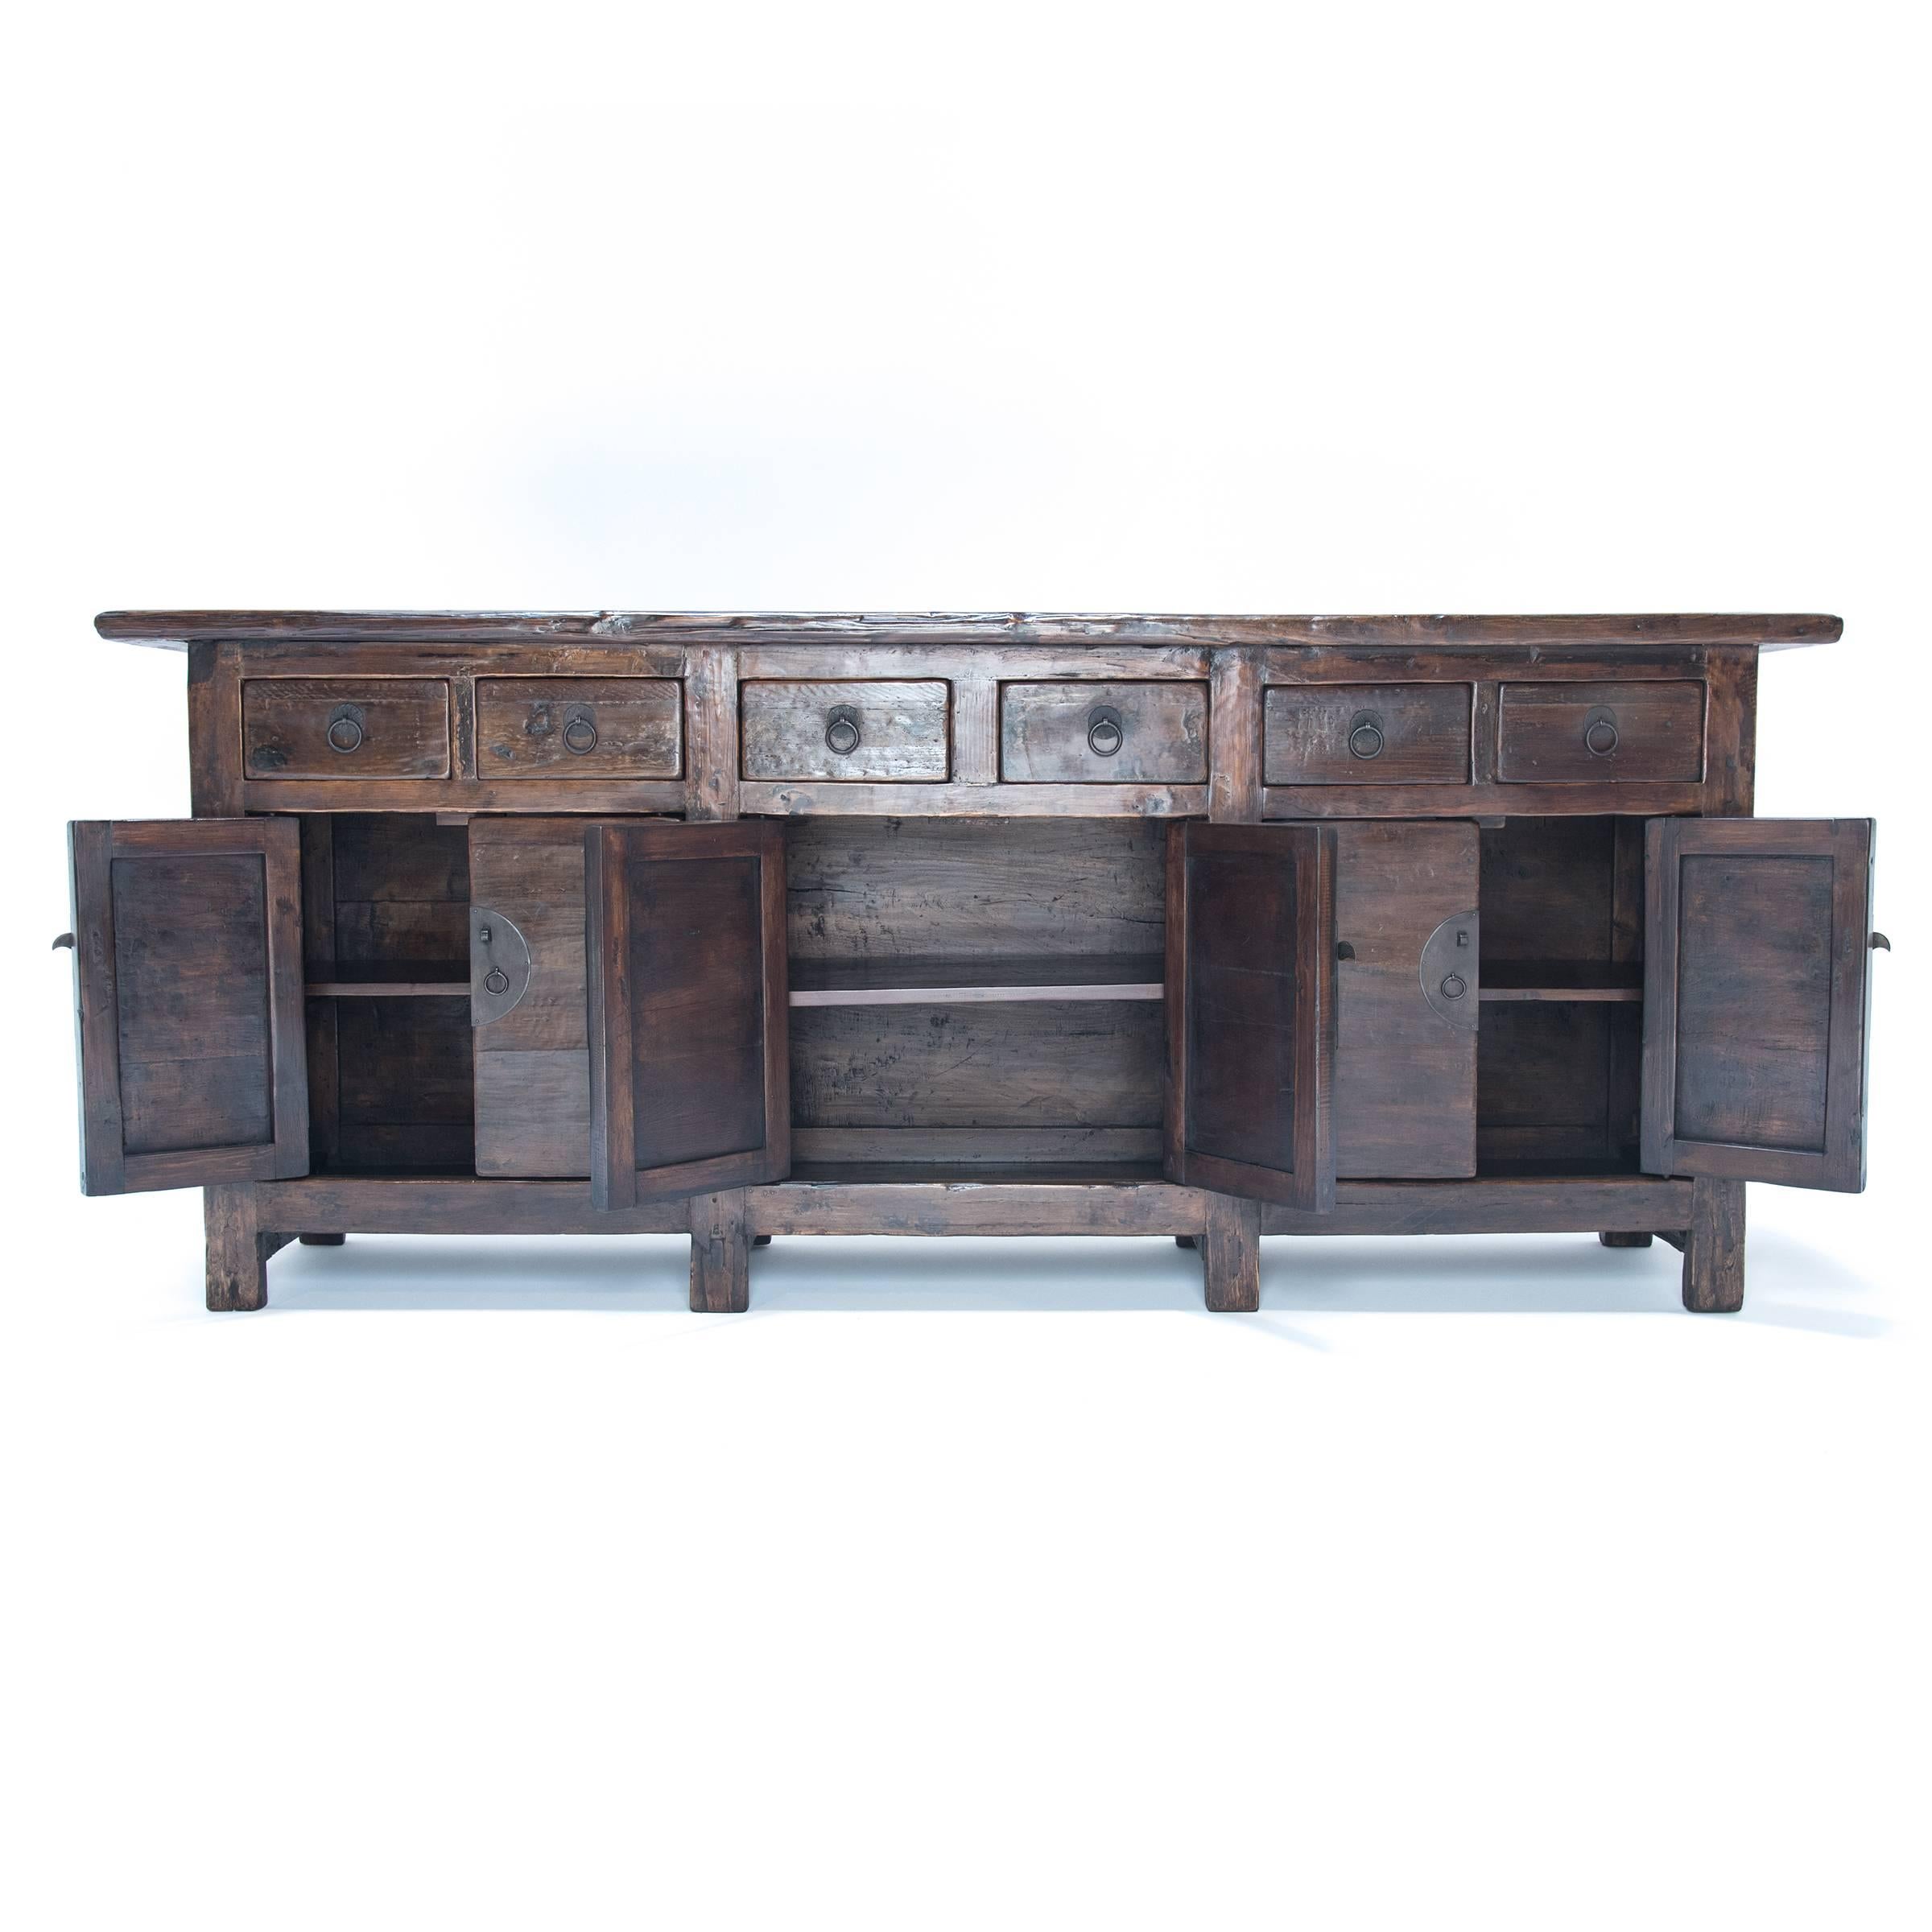 This elmwood coffer is joined together like a tight puzzle with traditional Chinese mortise and tenon construction. The joints are visible and beautiful elements of the overall simple design. The wood grain runs horizontally on the six doors and